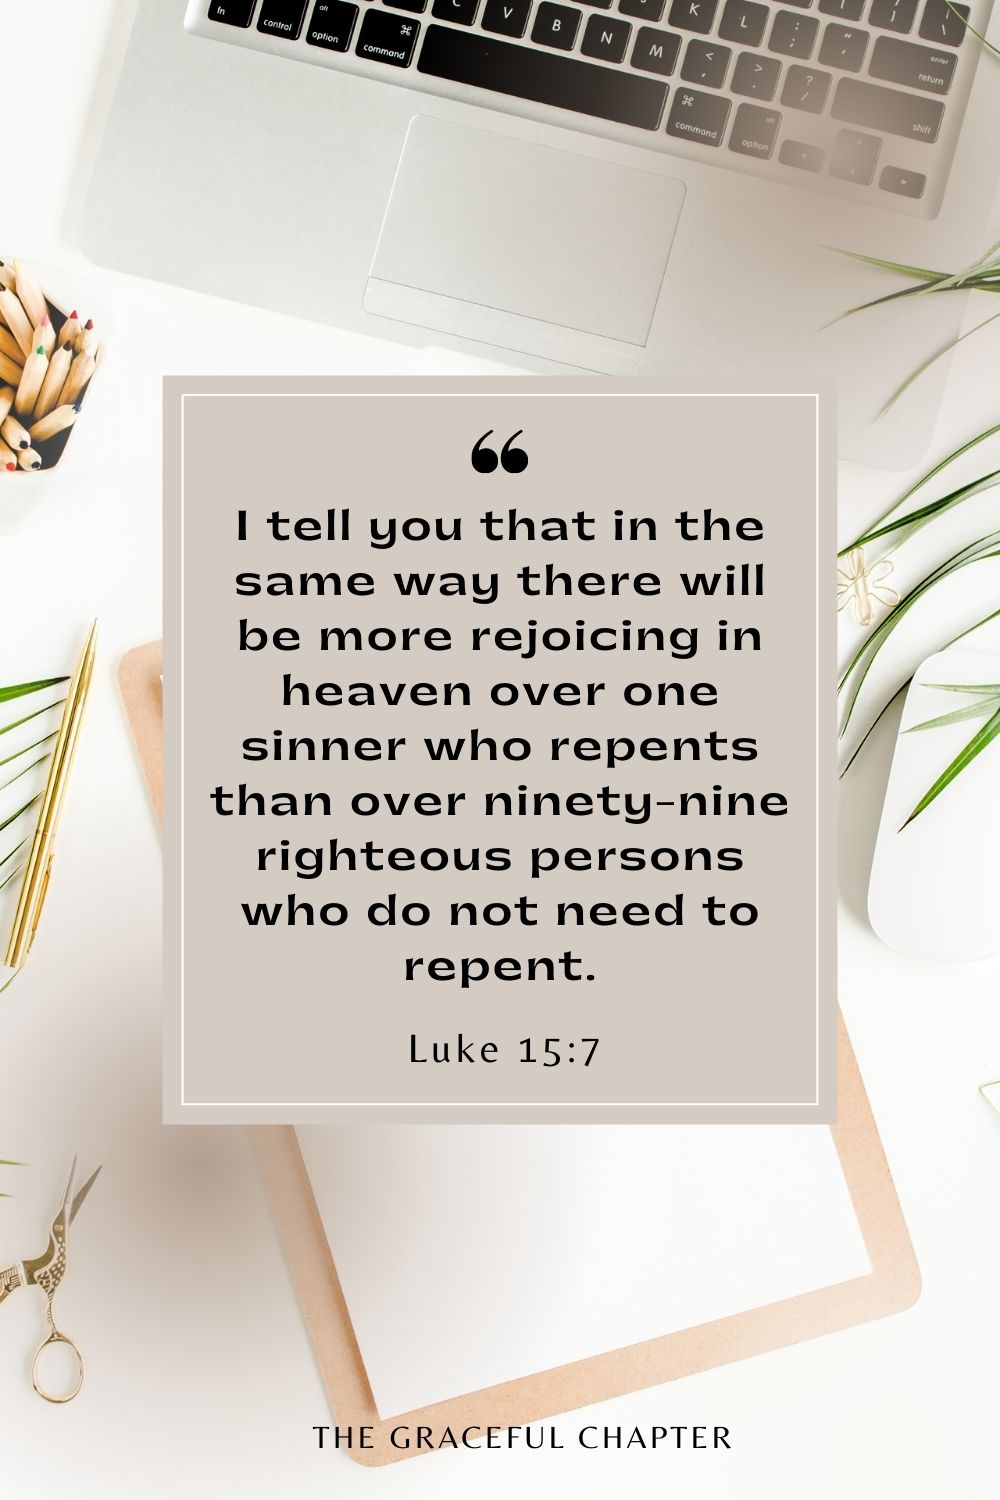 I tell you that in the same way there will be more rejoicing in heaven over one sinner who repents than over ninety-nine righteous persons who do not need to repent. Luke 15:7